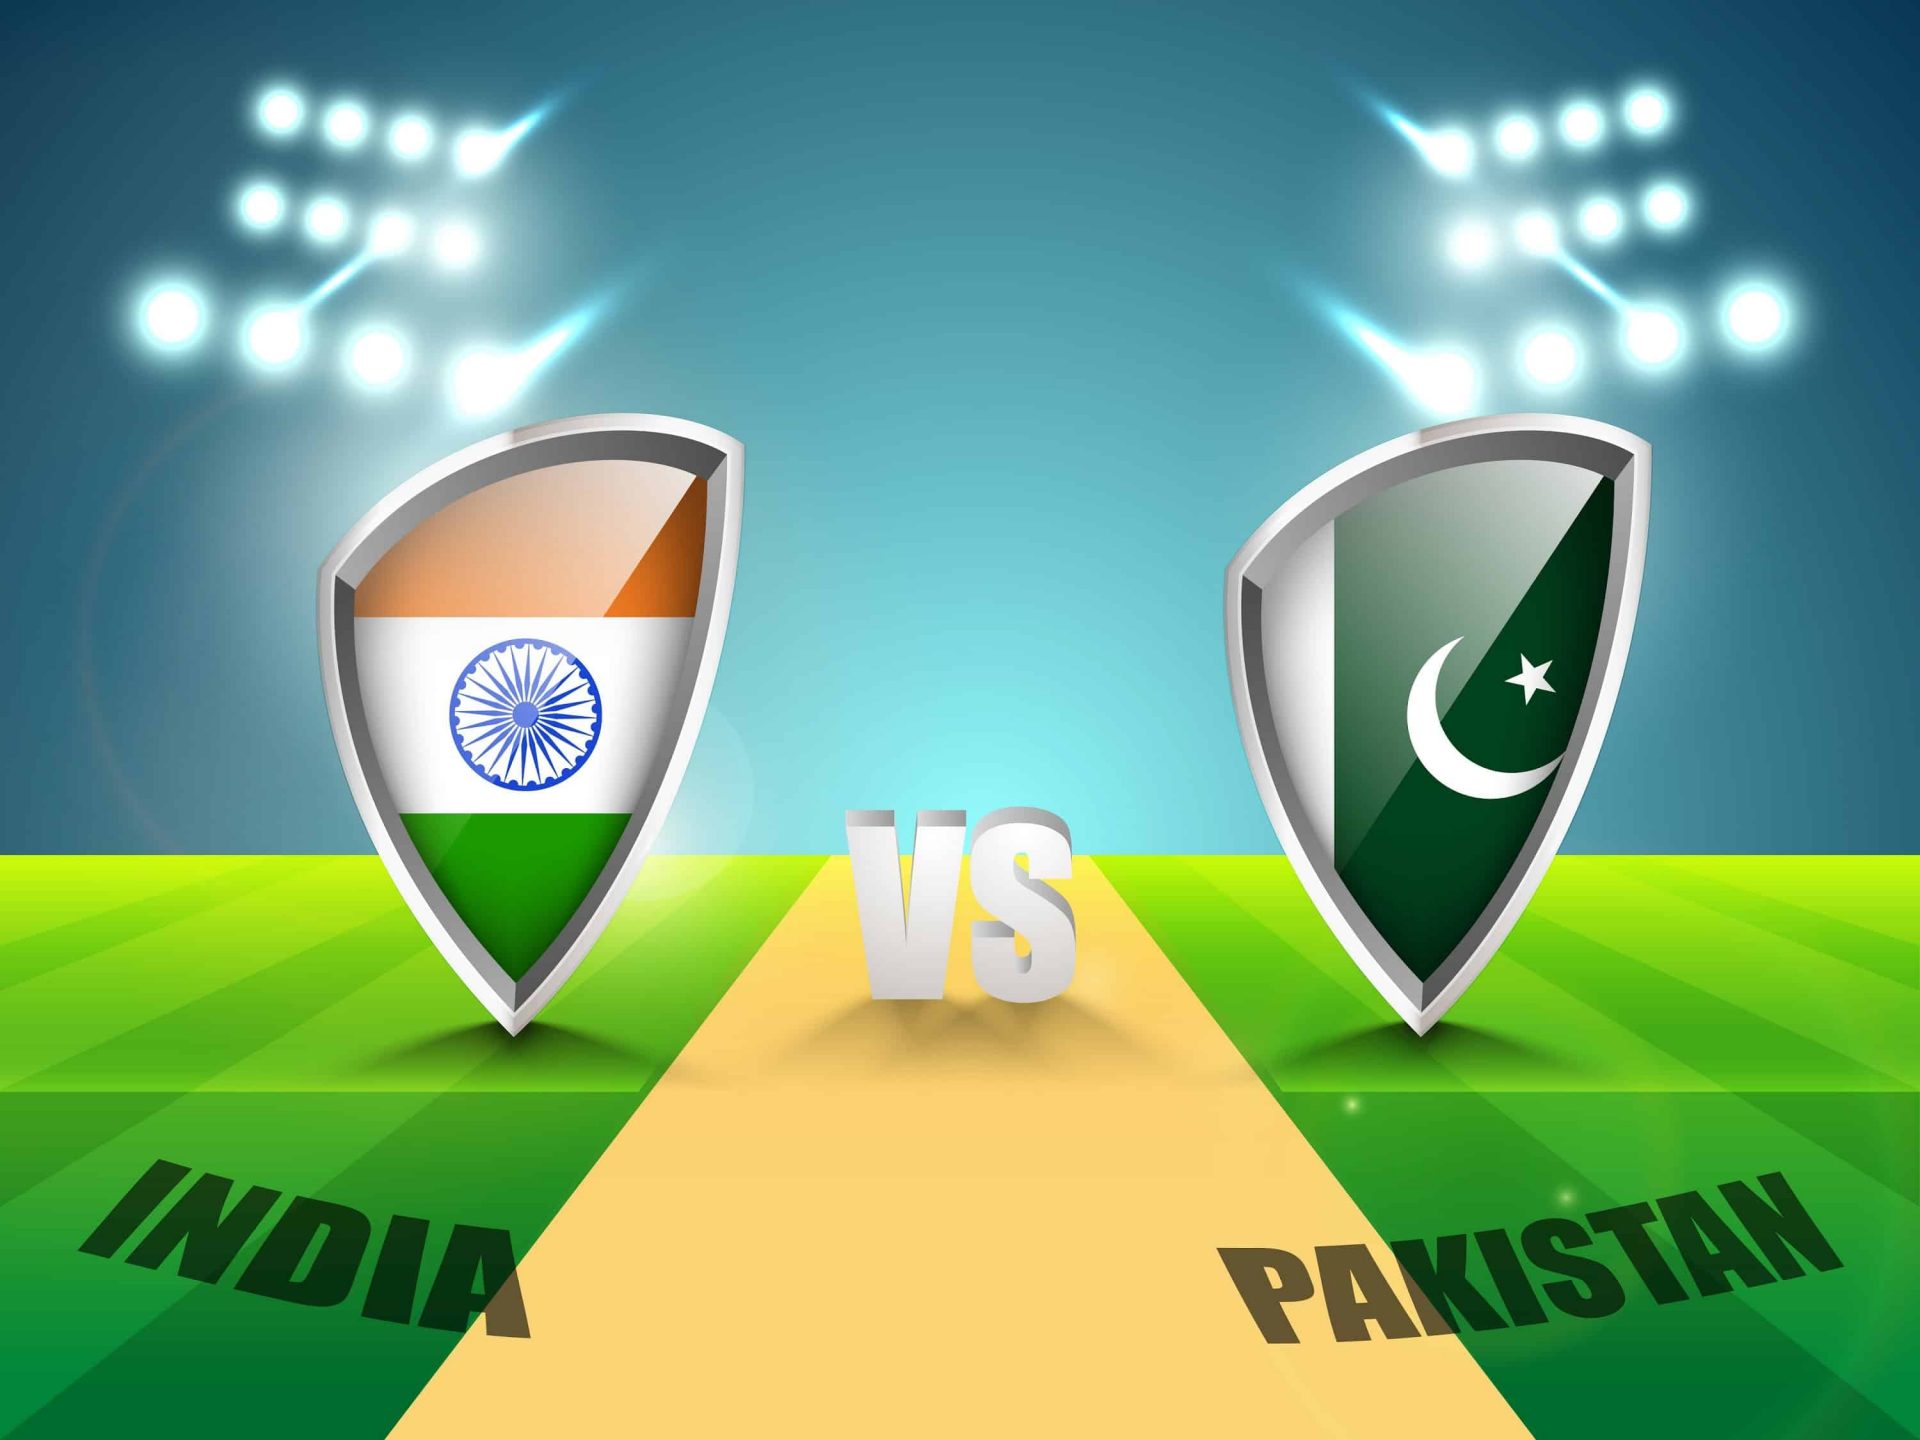 India starts its campaign with an easy win against Pakistan